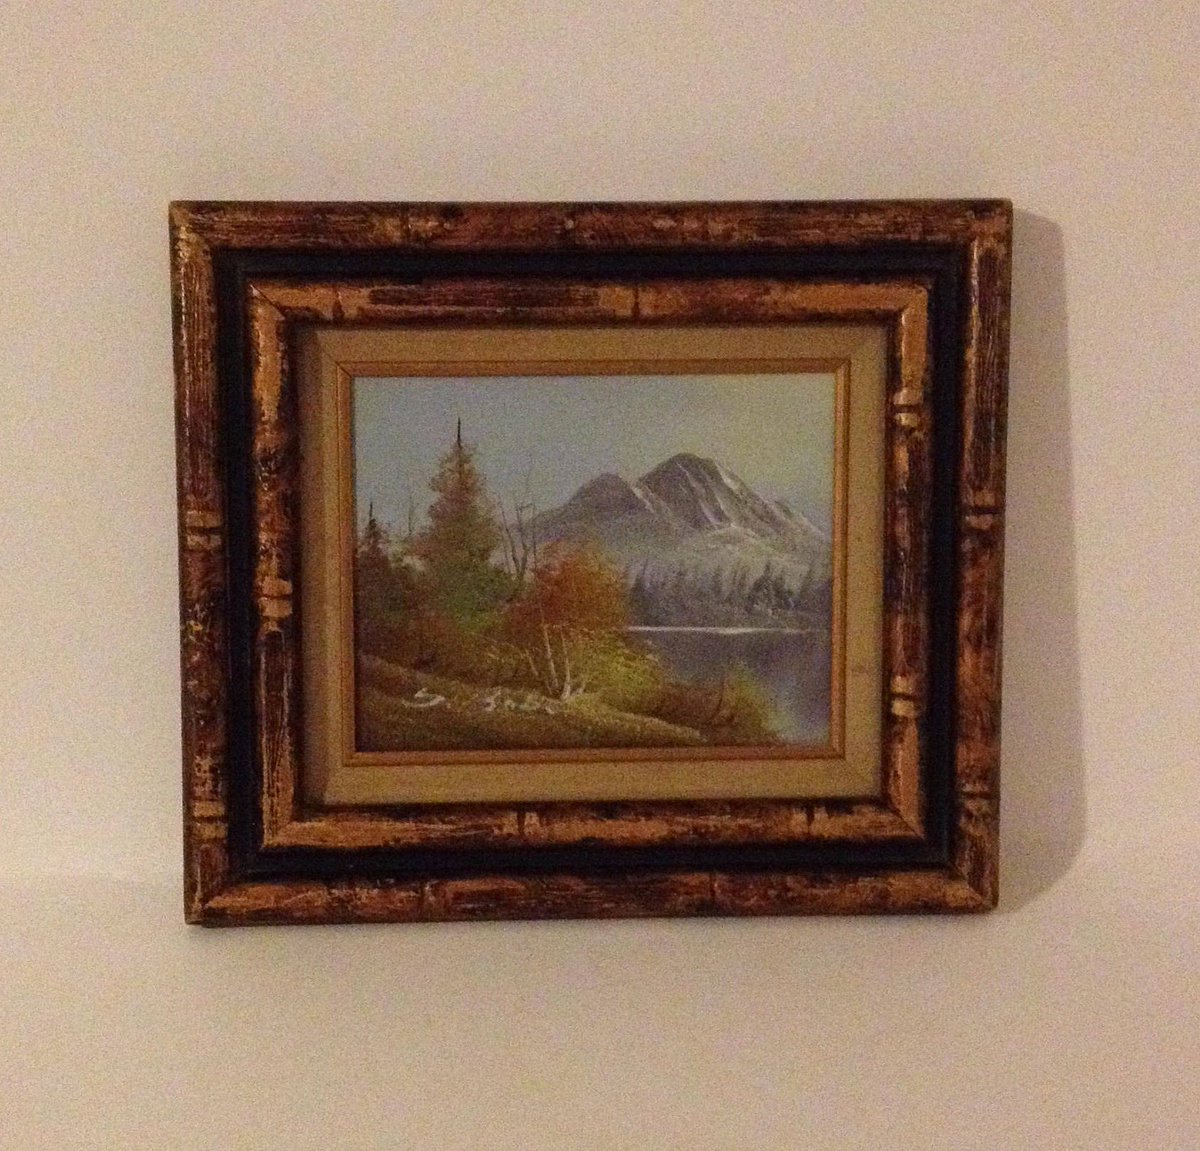 Excited to share the latest addition to my #etsy shop: Vintage Framed Landscape Mountain Lake Forest Scene Oil on Canvas Painting Bronze Brown Wood Frame Snow Top Fall Winter Cabin Lodge Decor etsy.me/2Sm9uoE #art #painting #oilpainting #vintageoilpainting #ant